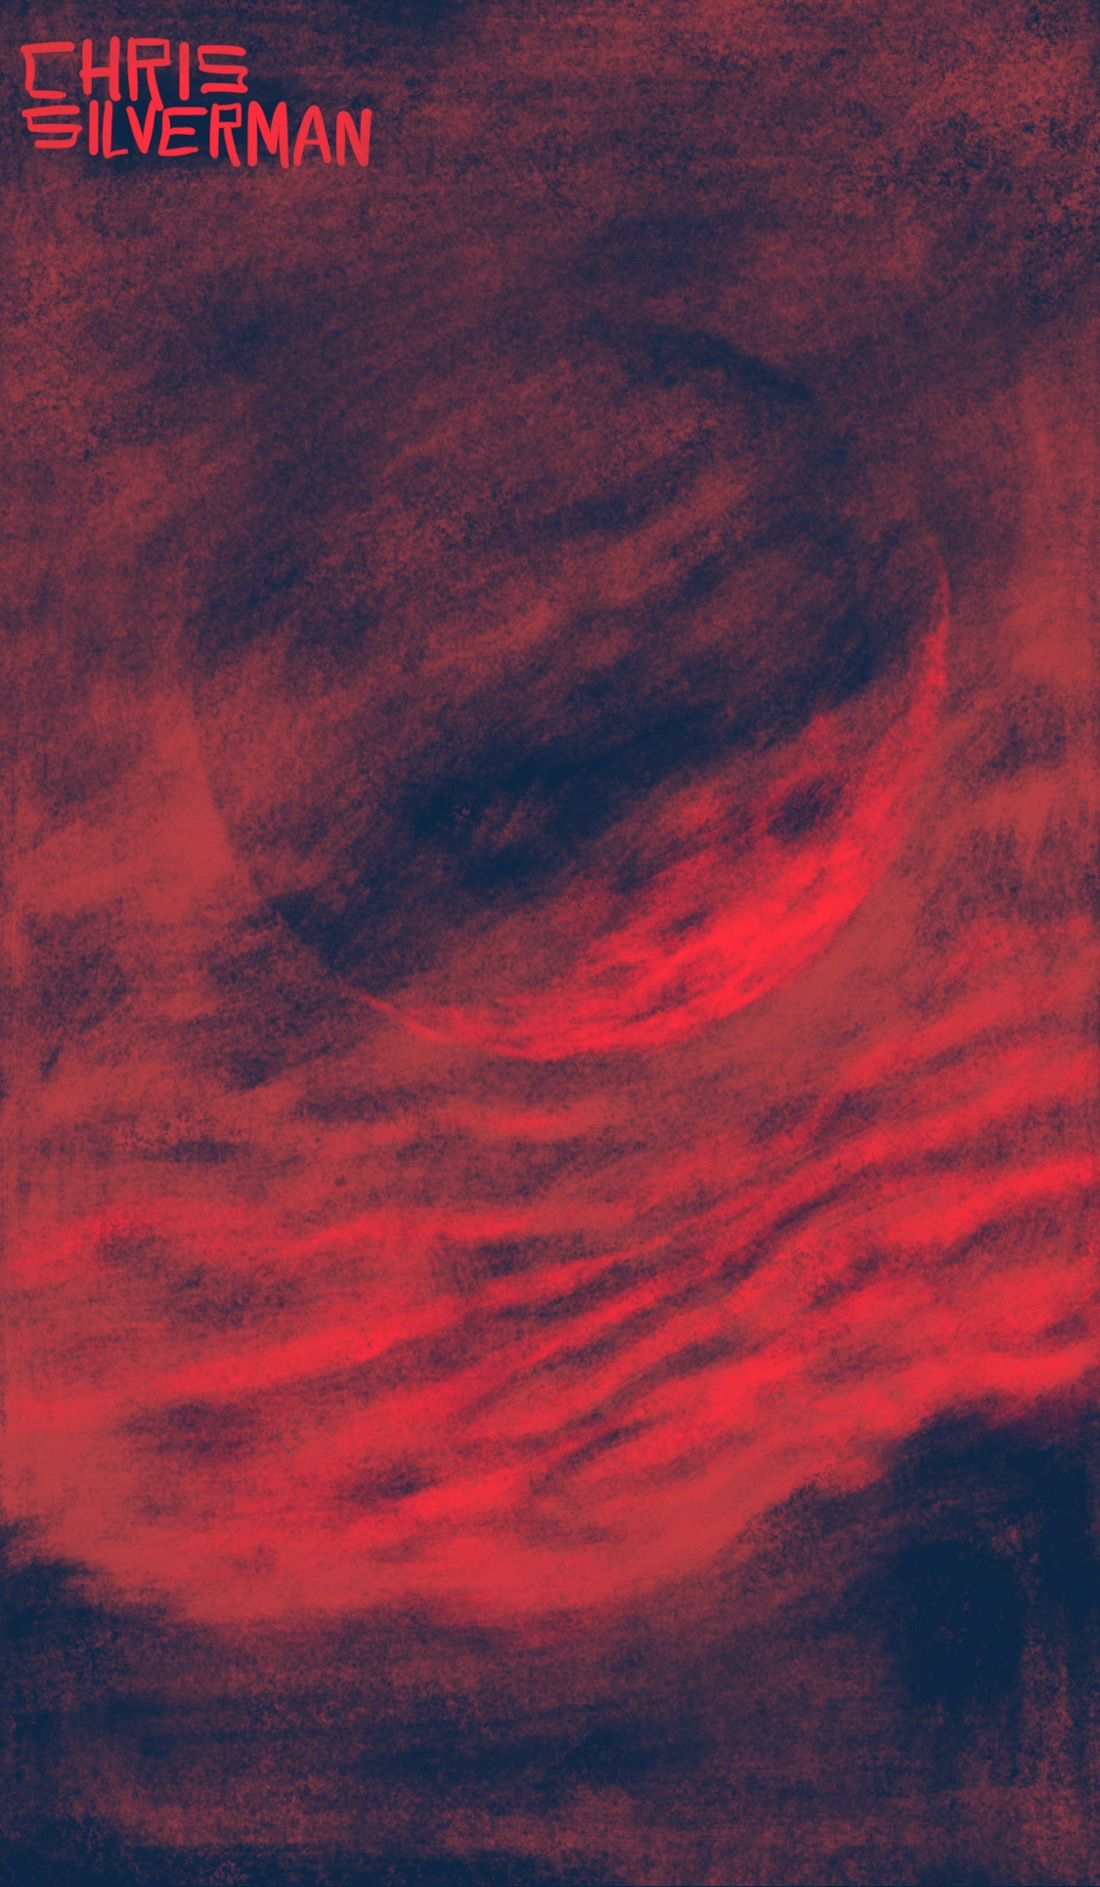 A cloudy sunrise or sunset. Waves of red clouds hover over a ragged mountainous horizon. Hanging in the sky is an enormous planet, partially covered by clouds and lit from below by the sun. This is a primarily red and black painting.